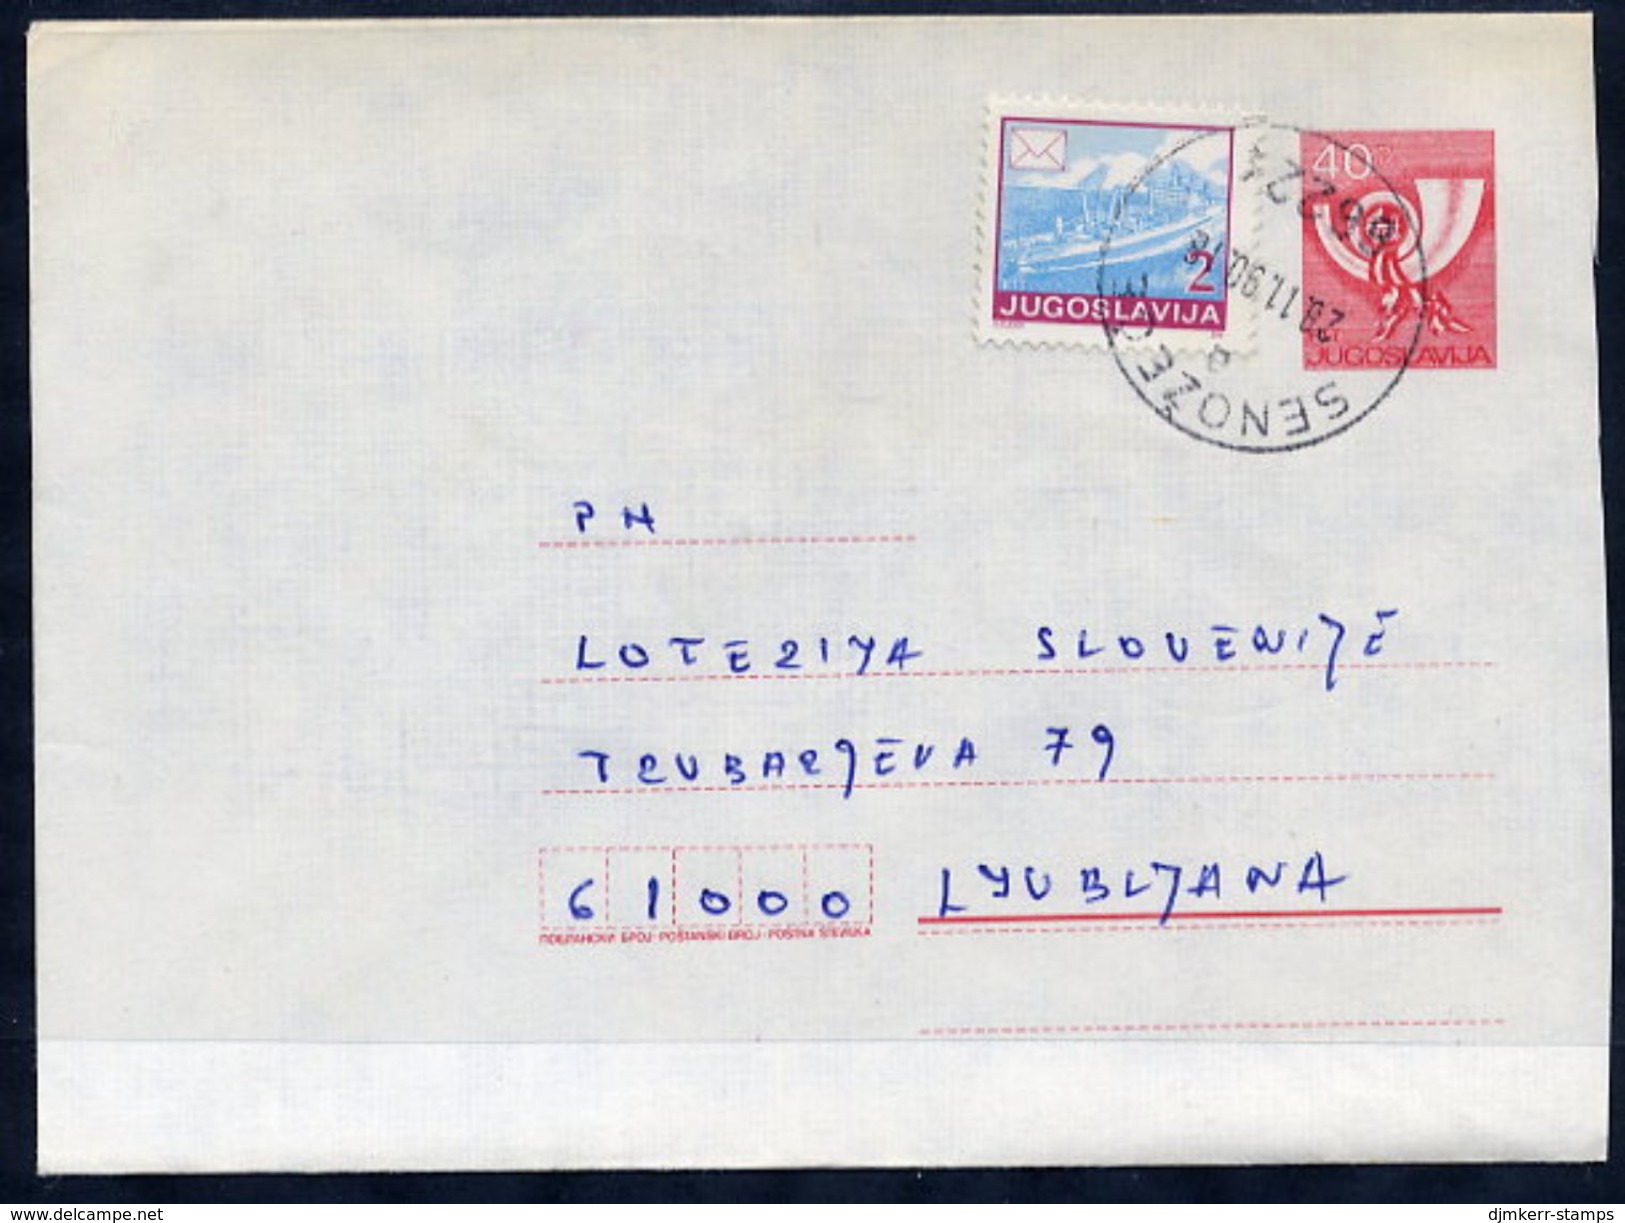 YUGOSLAVIA 1986 Posthorn 40 D.stationery Envelope Format A  Used With Additional Franking.  Michel U76A - Interi Postali